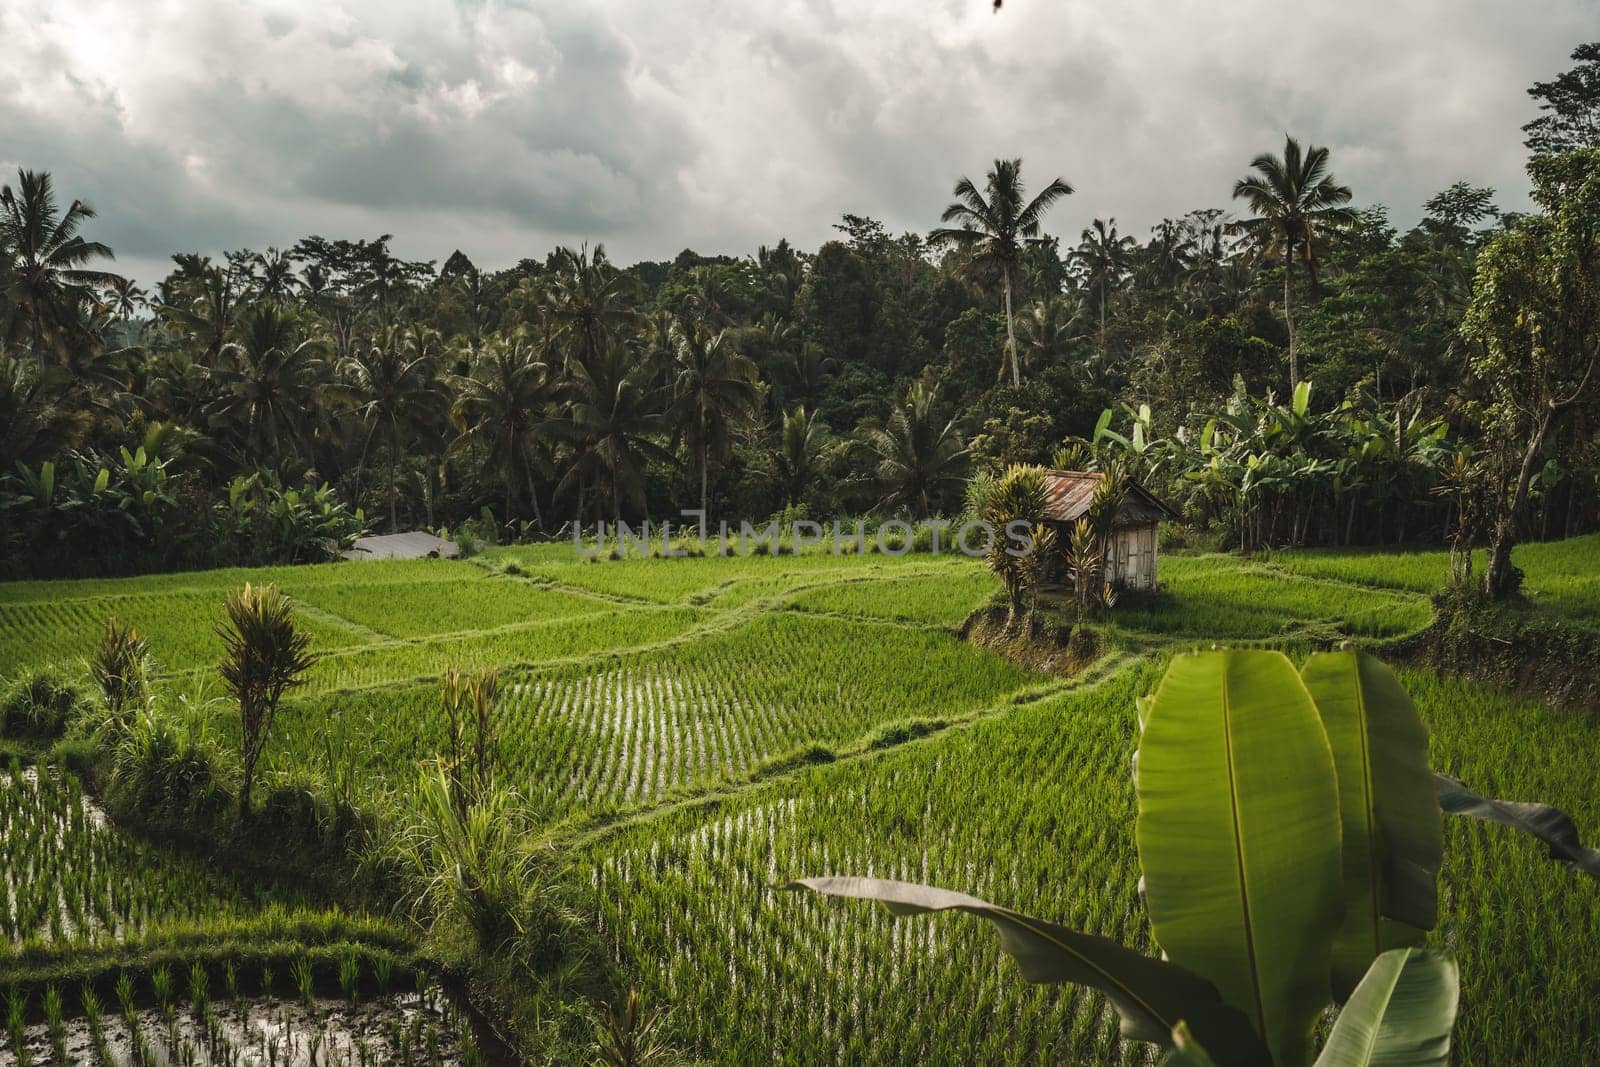 Landscape view of rice plantation near the palms jungle. Balinese farming agriculture, rice growing field